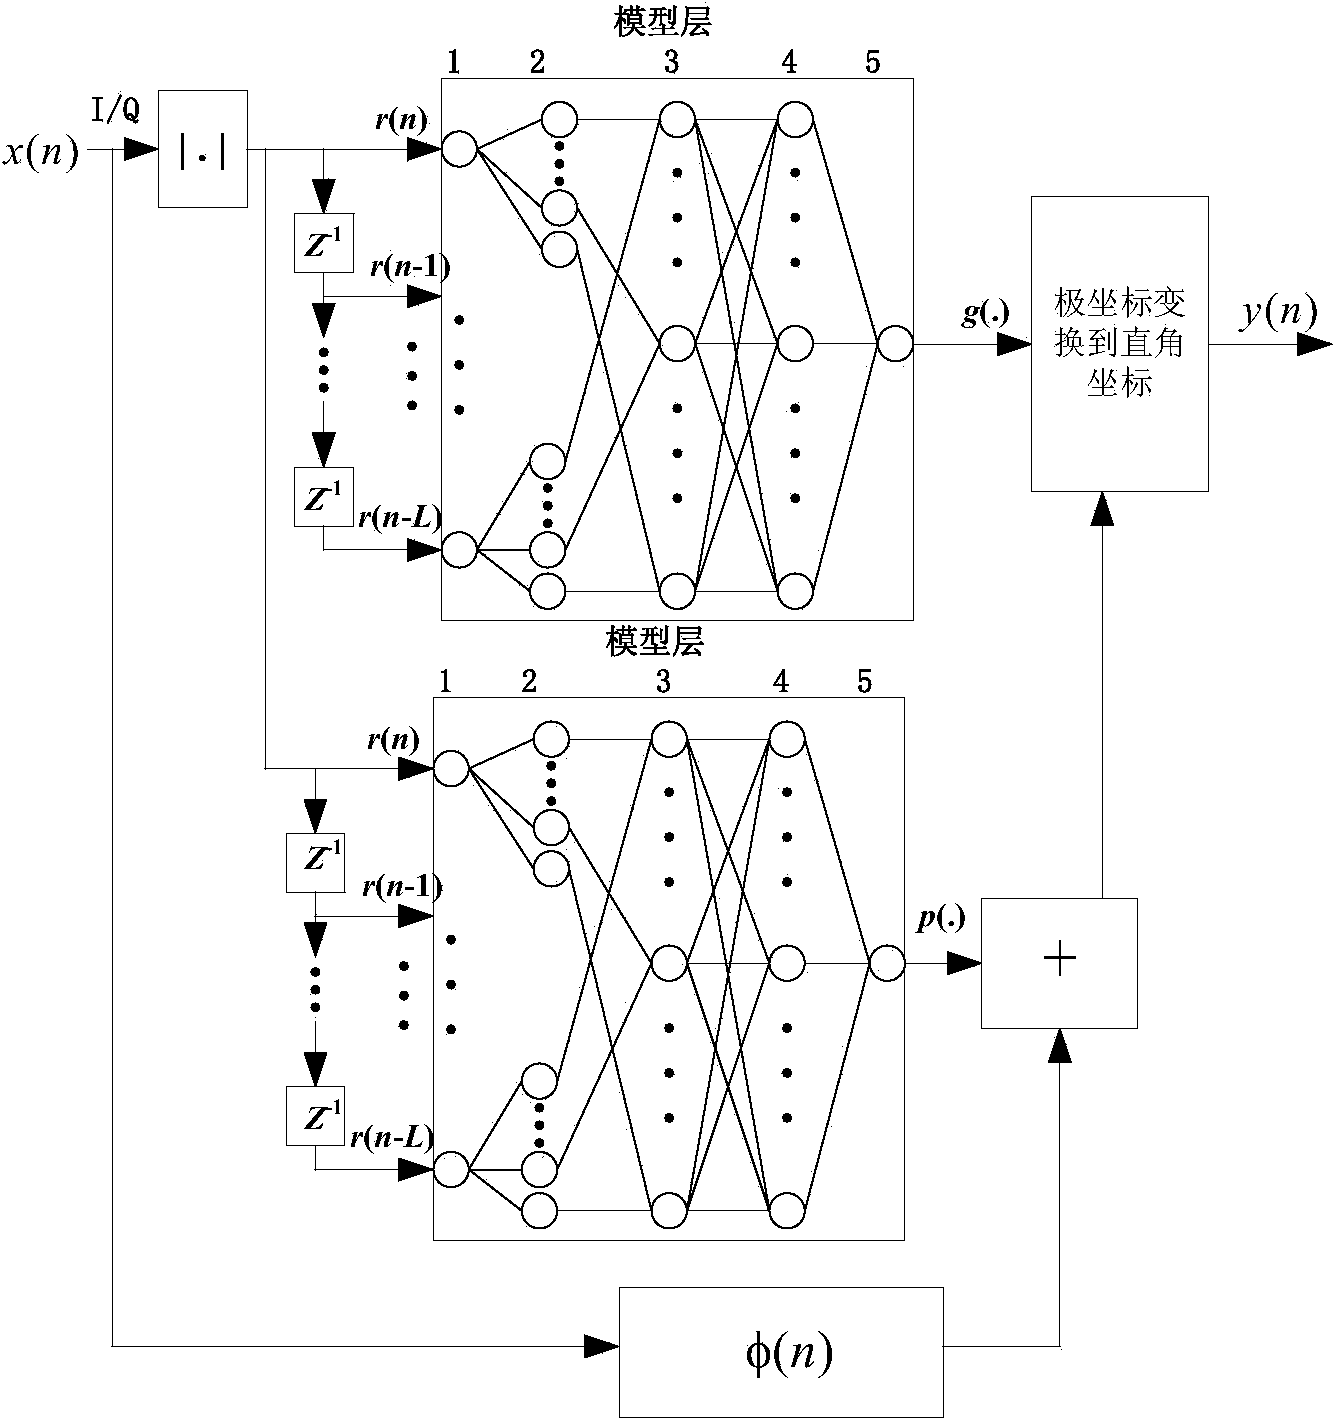 Amplifier digital pre-distortion device and method based on dynamic fuzzy neural network